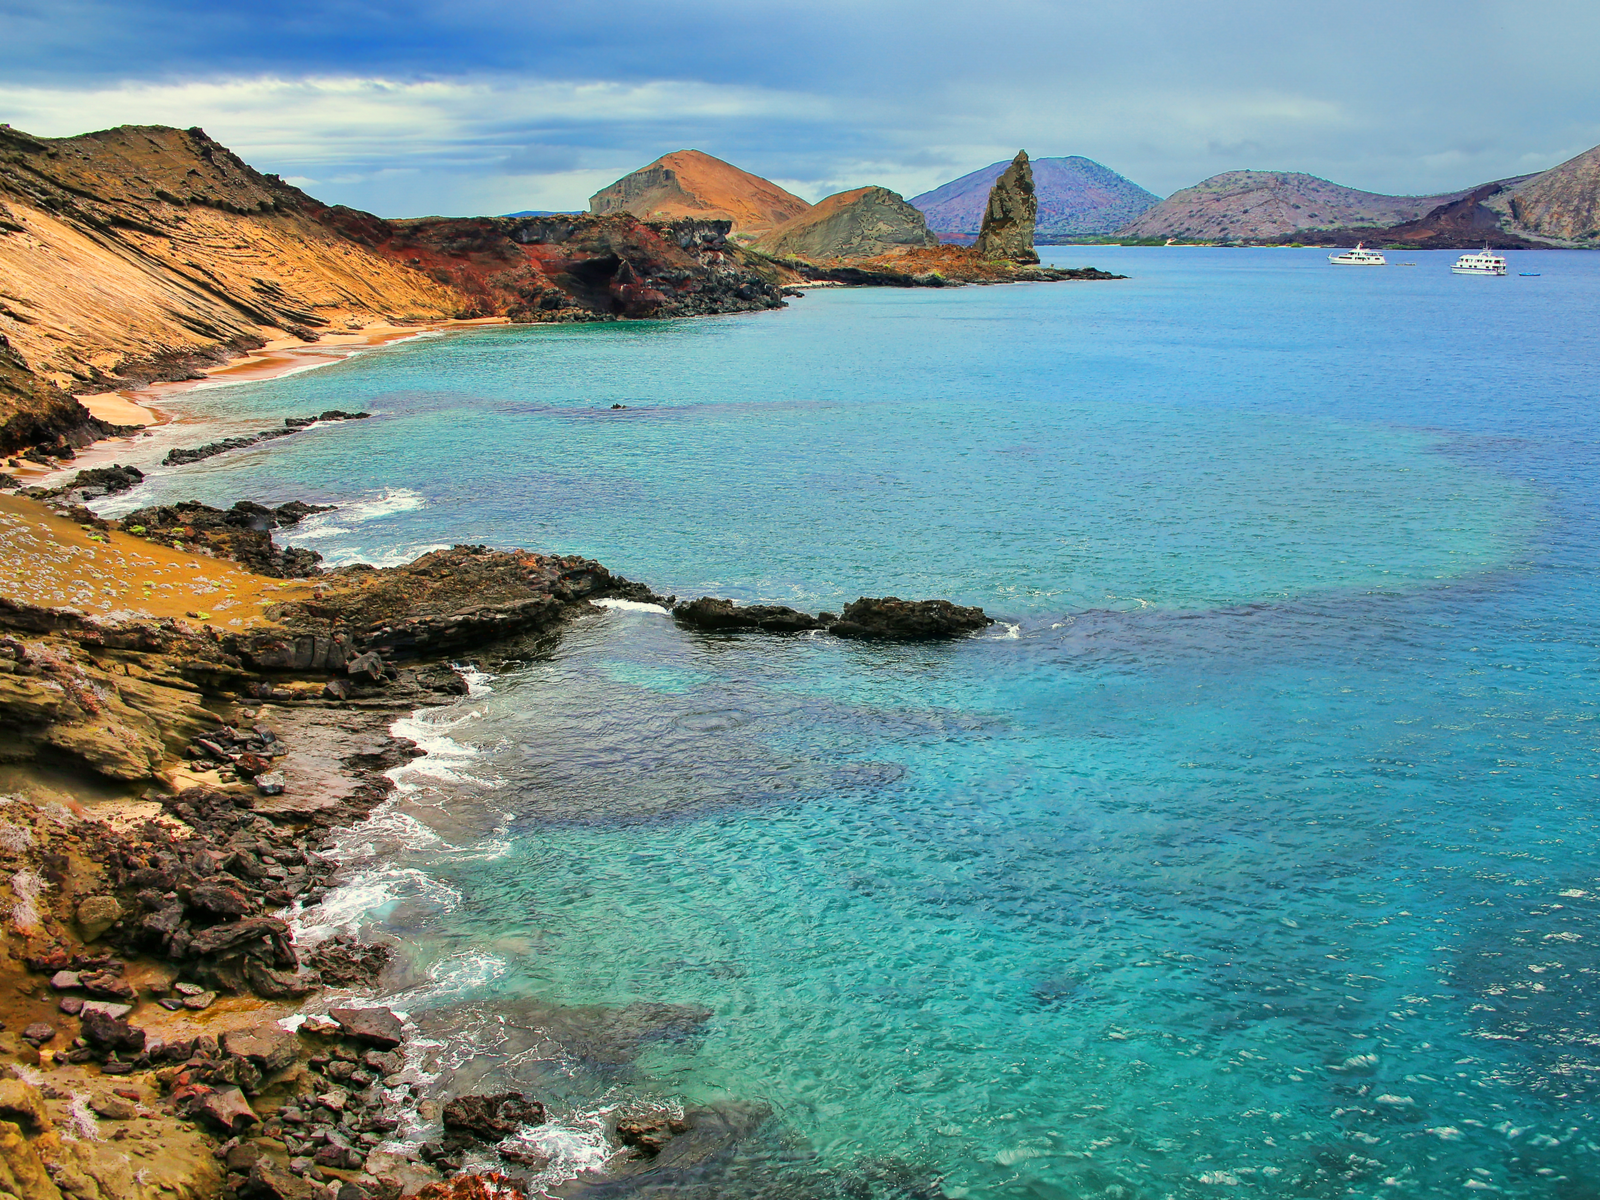 Coastline of Bartolome island in the Galapagos during the best time to visit Ecuador